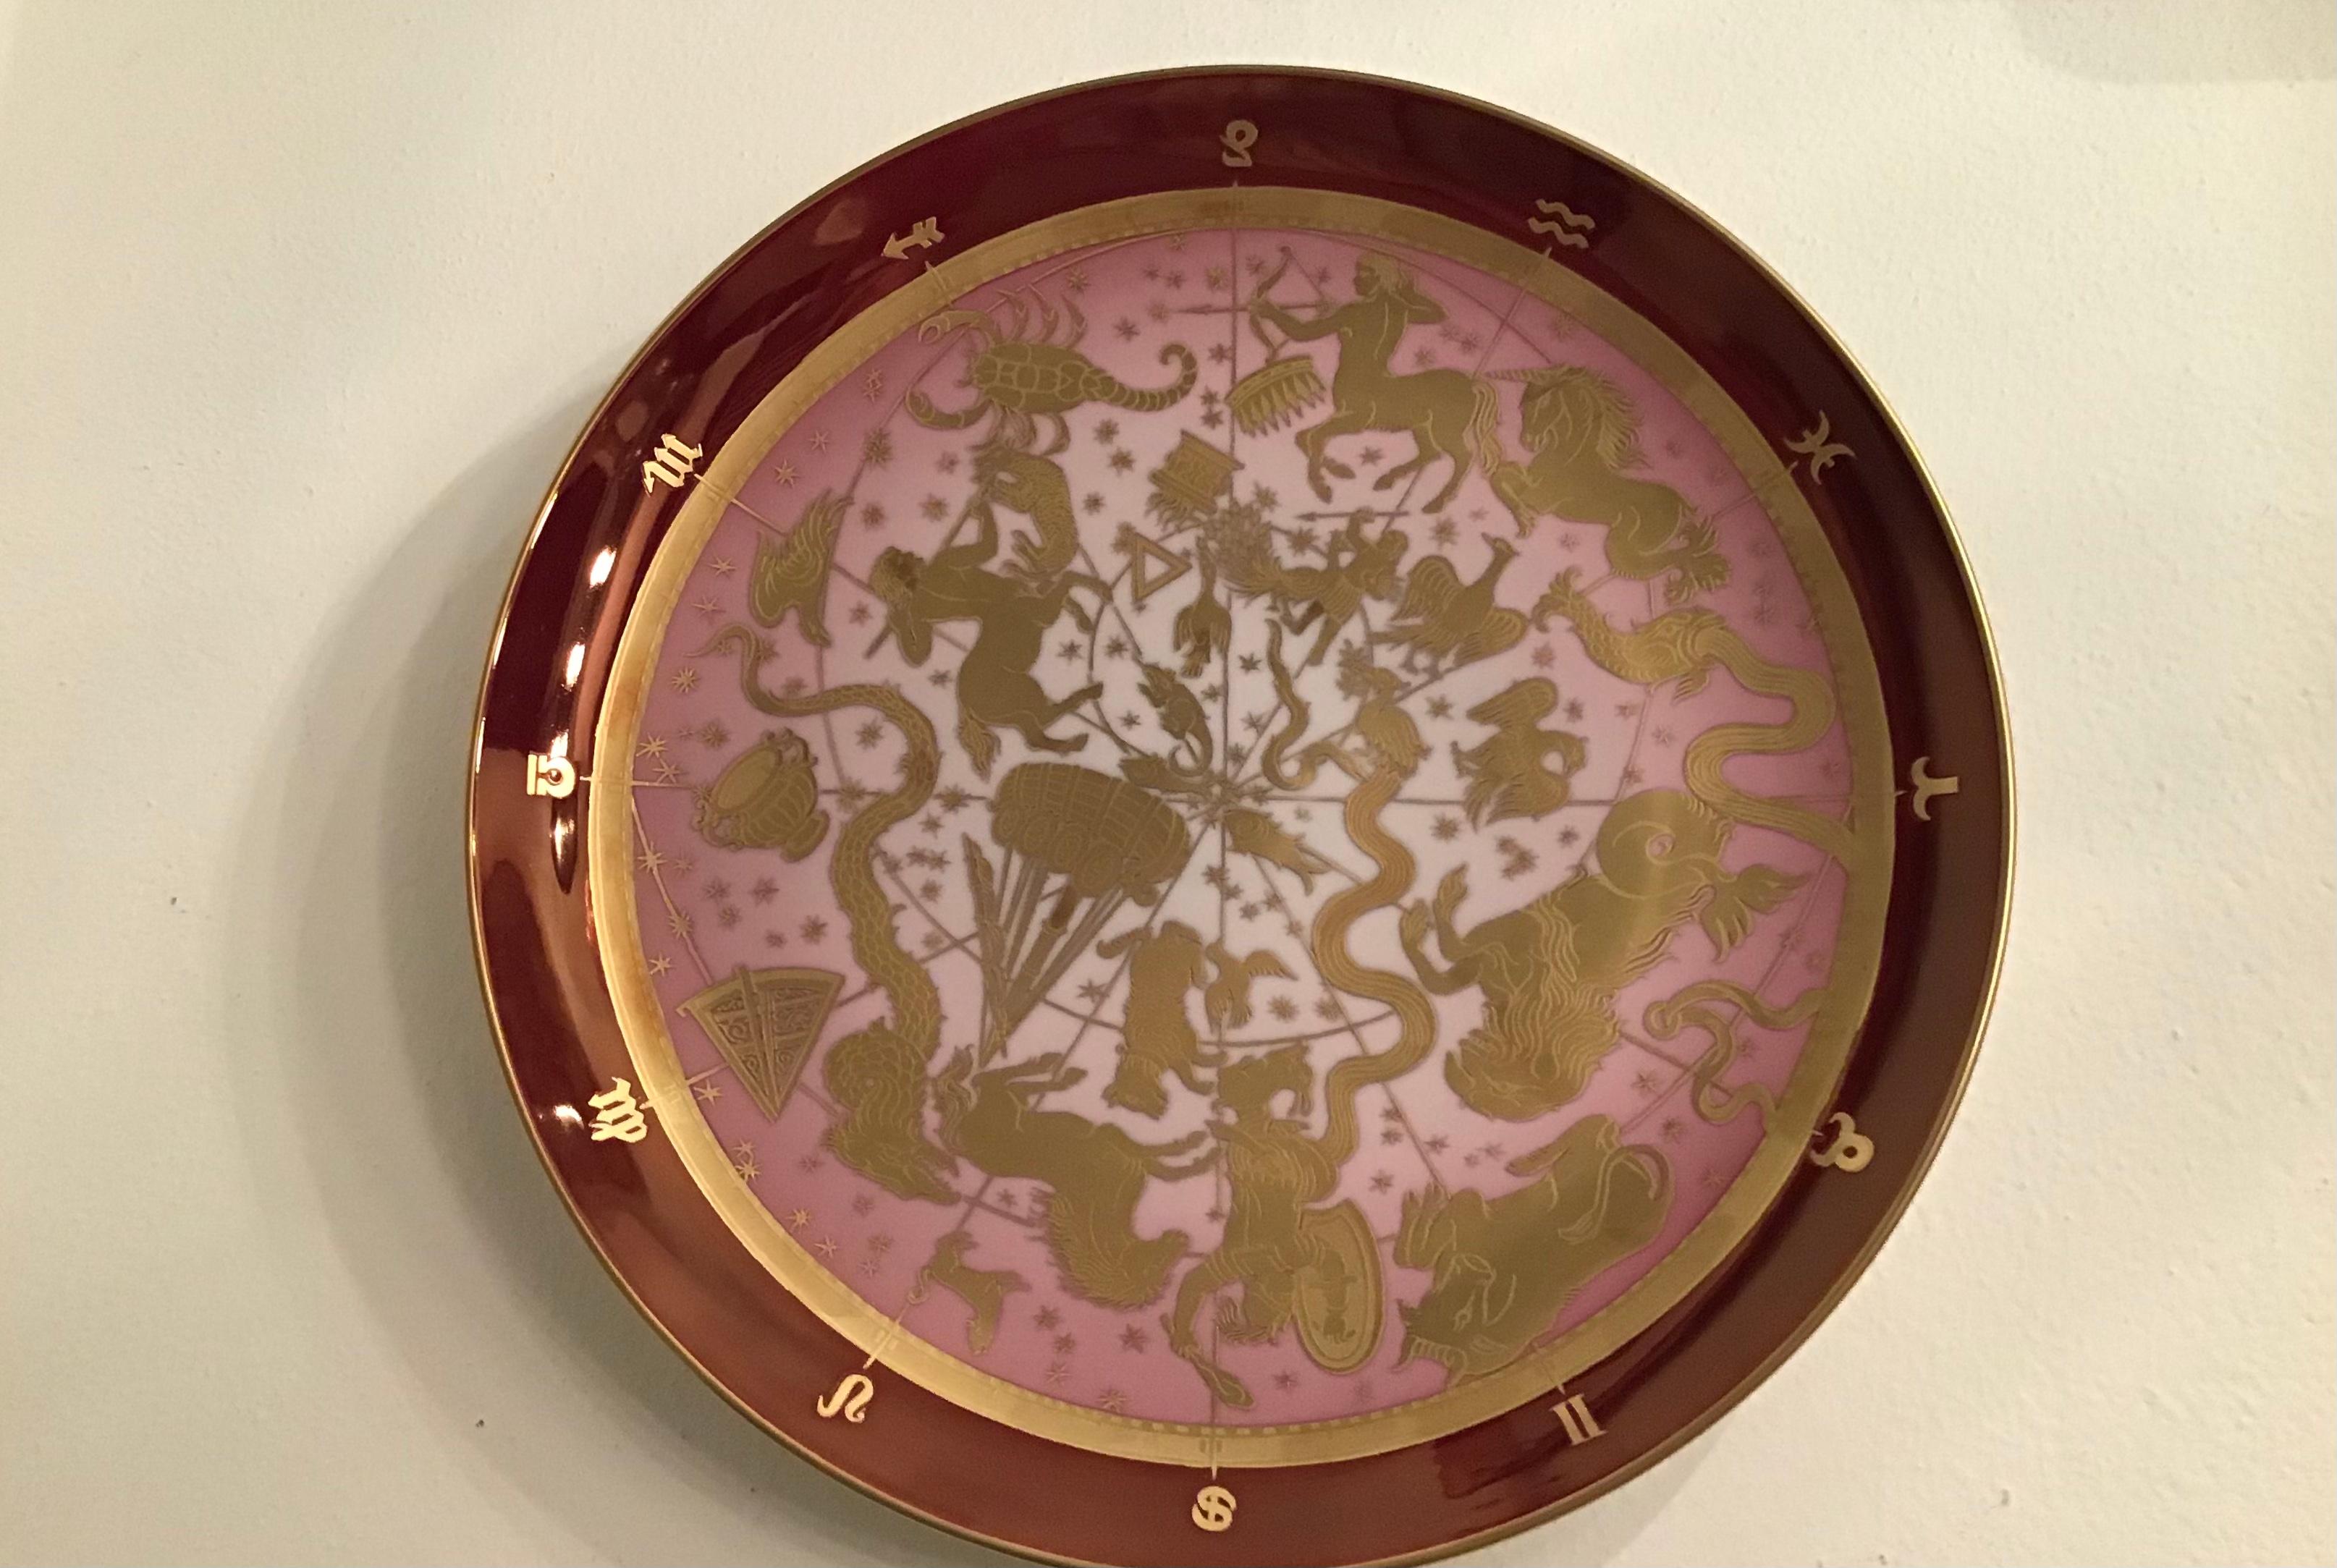 Other Morbelli Porcelain Wall Plate “Planisfero Celeste“ Worked with Pure Gold 1960 IT For Sale